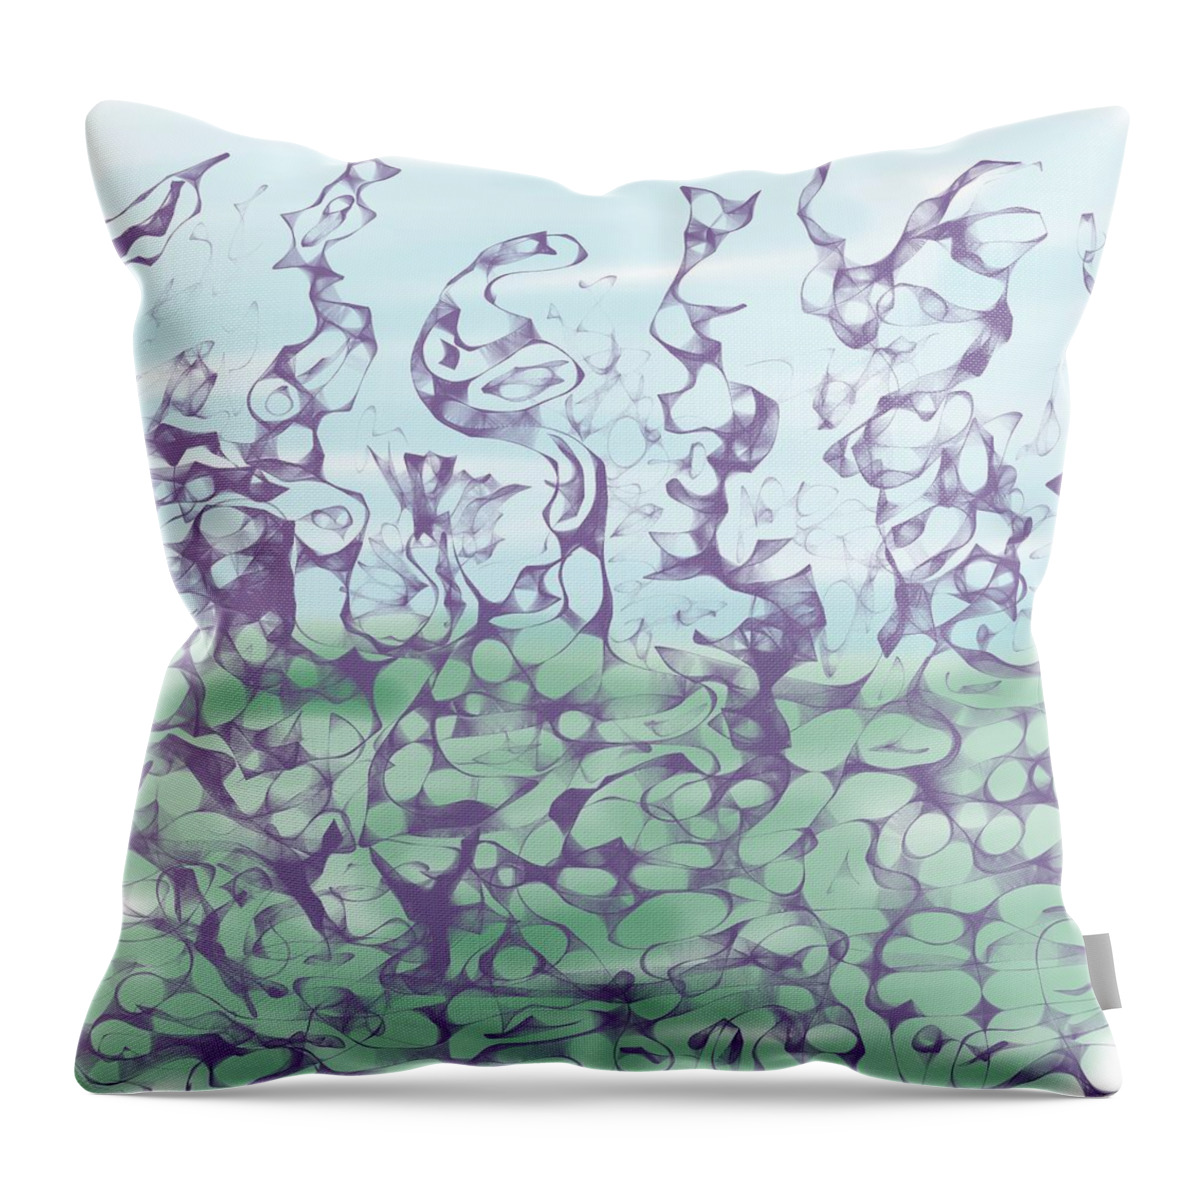 Abstract Throw Pillow featuring the digital art Alien landscape 01 by Jean Evans